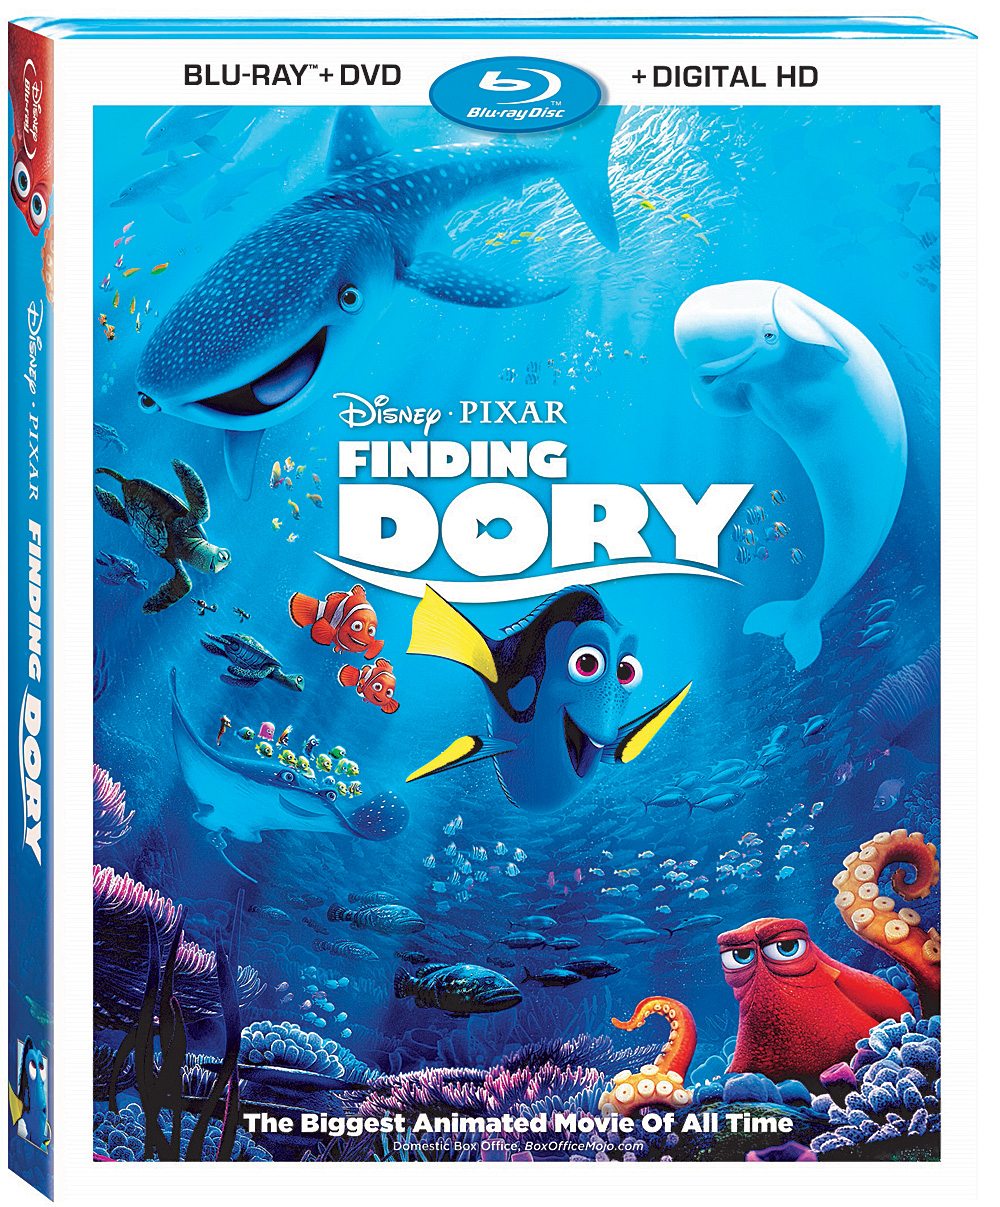 watch finding dory online free gomovies